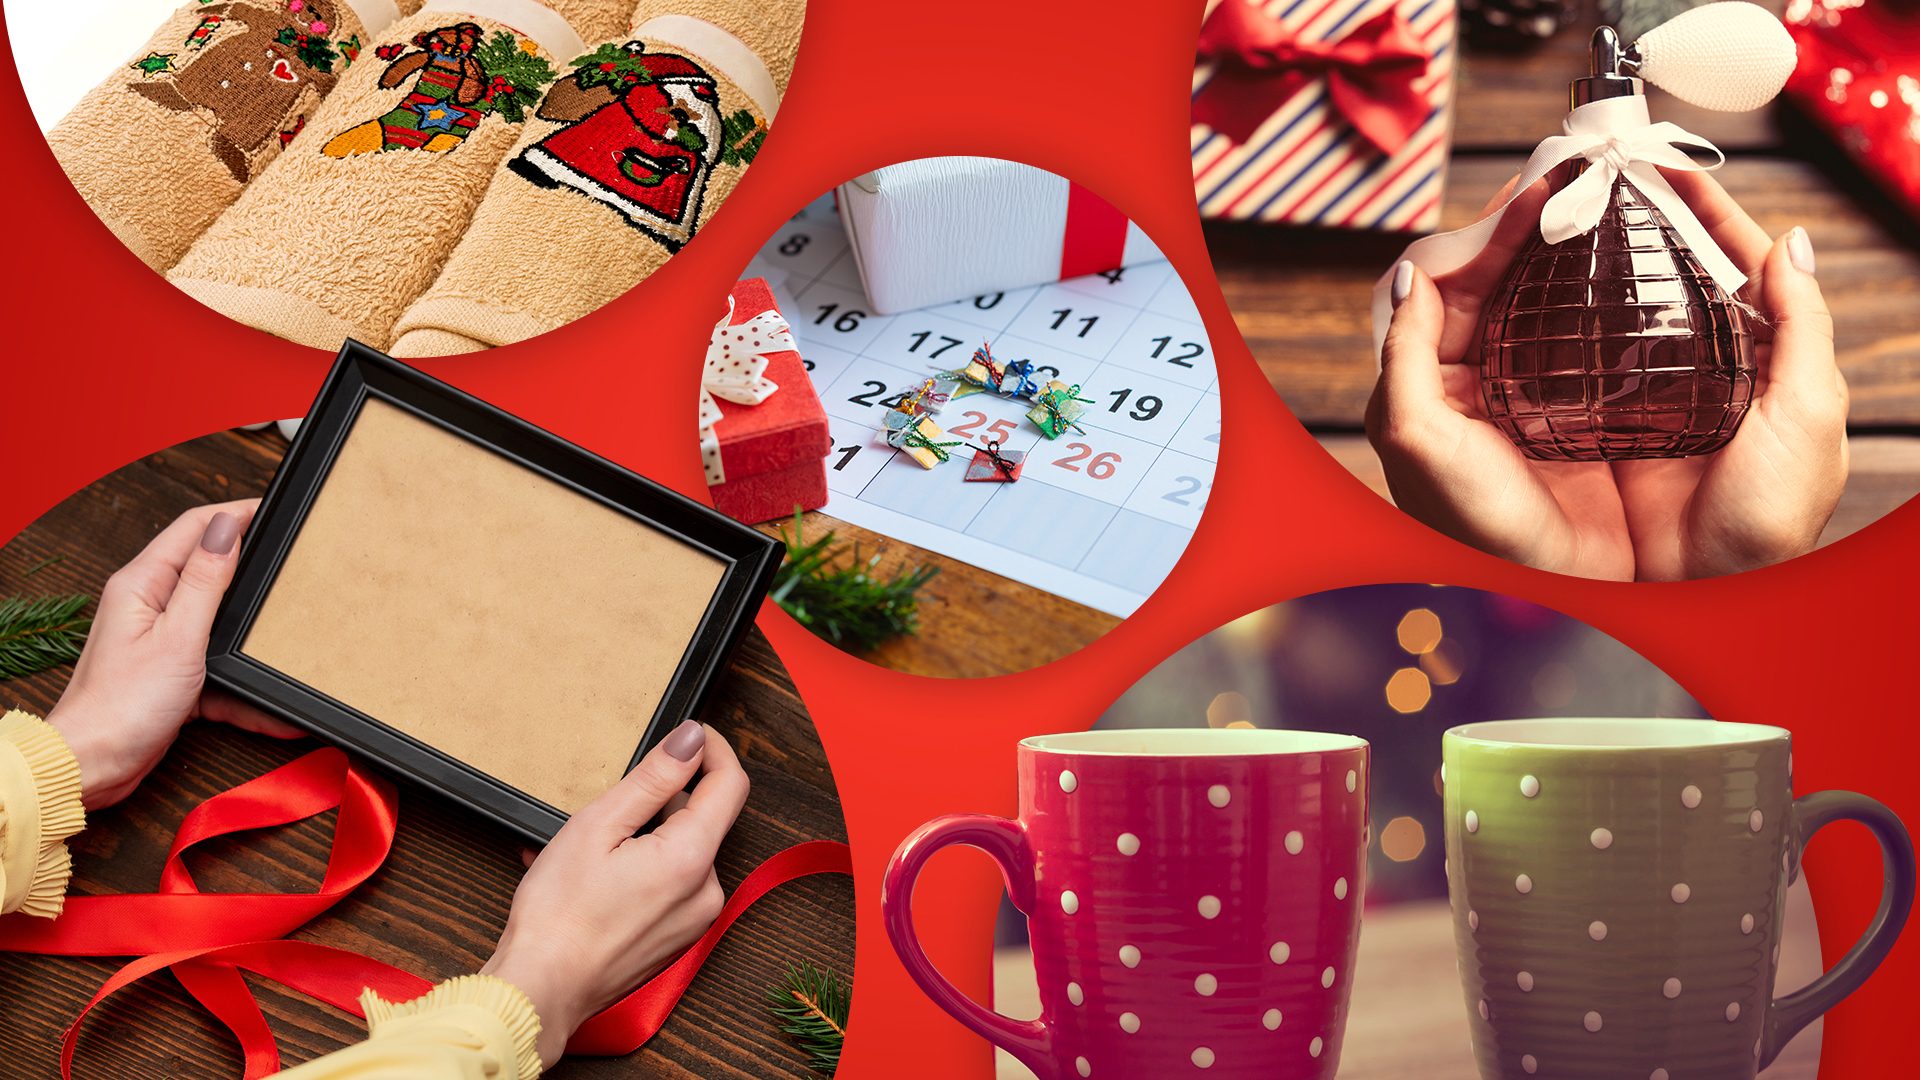 Bah humbug! 6 Christmas gifts we’re tired of getting each year